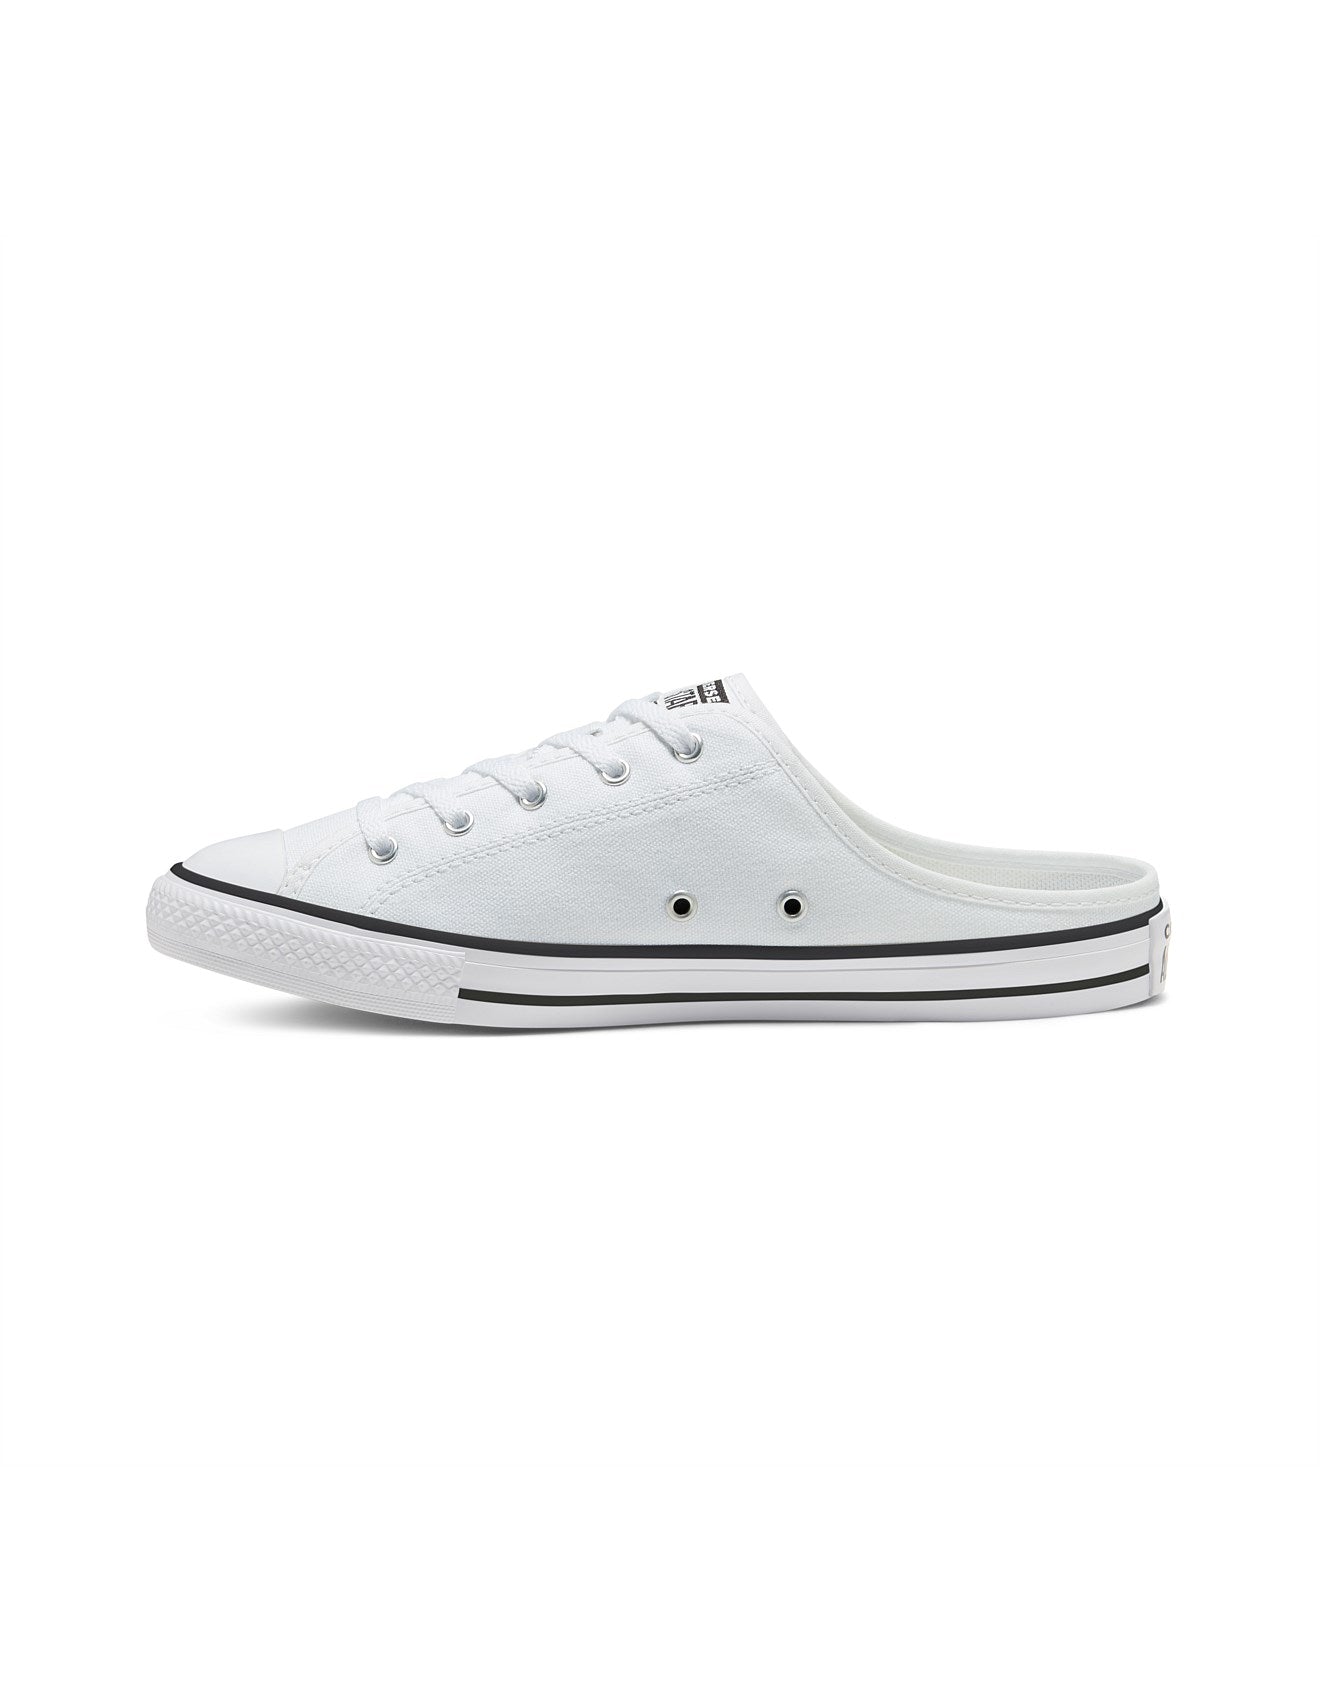 CONVERSE Chuck Taylor All Star Womens Dainty Mule Shoe - White